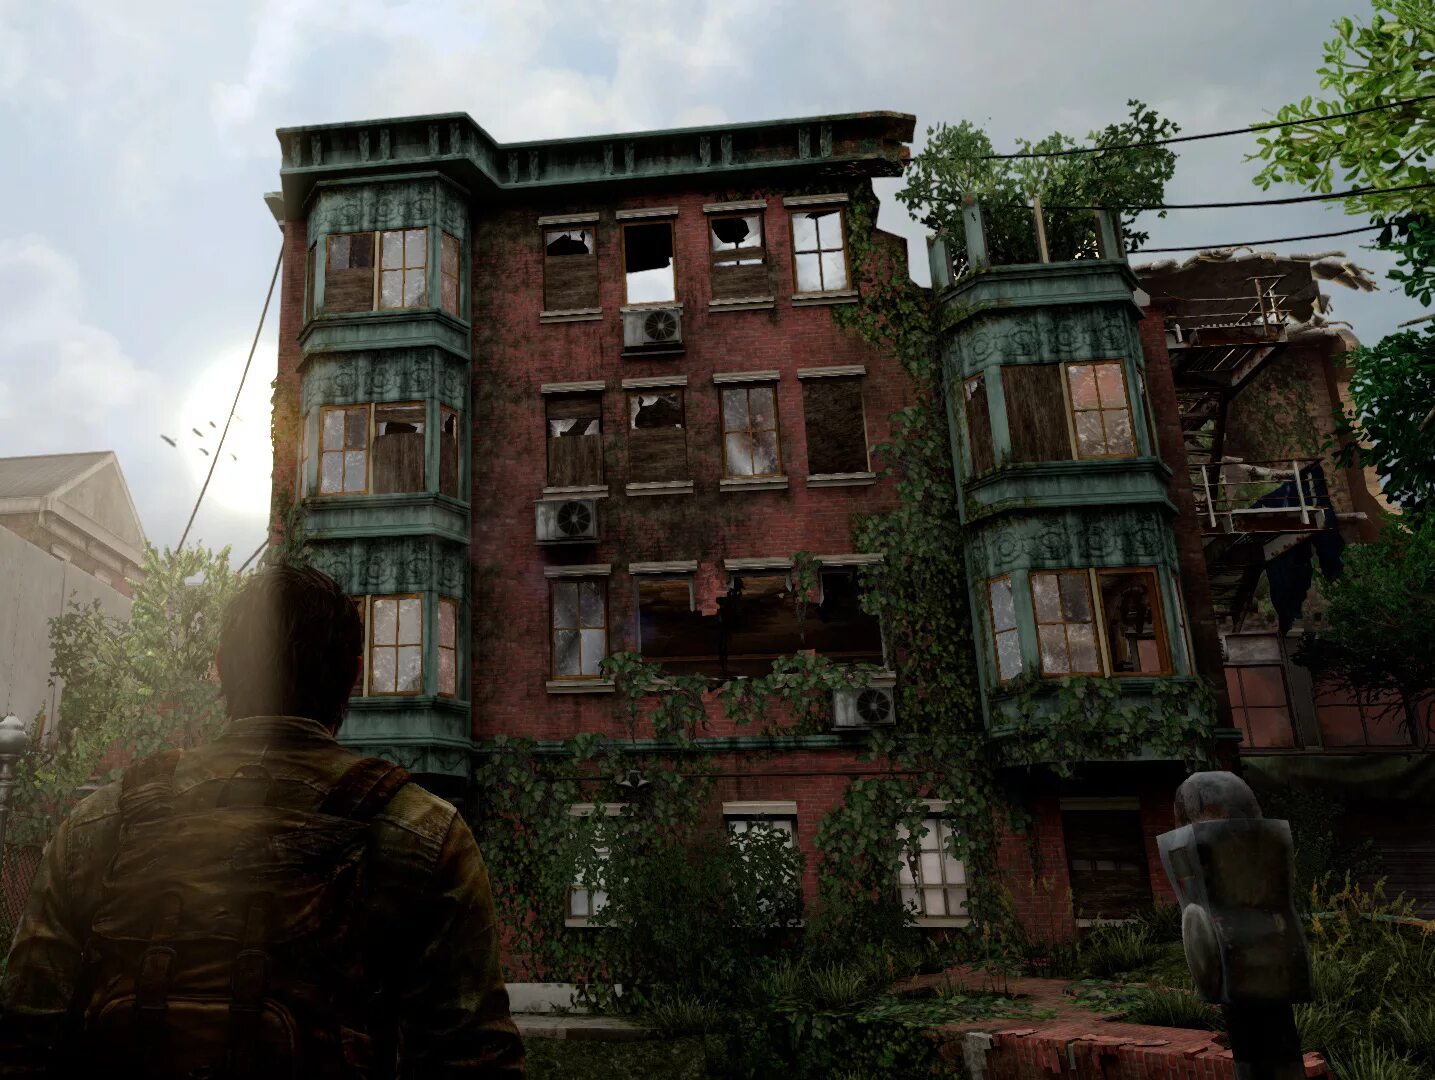 Town of us 3 3 2. The last of us 2 город. The last of us локации. The last of us здания.